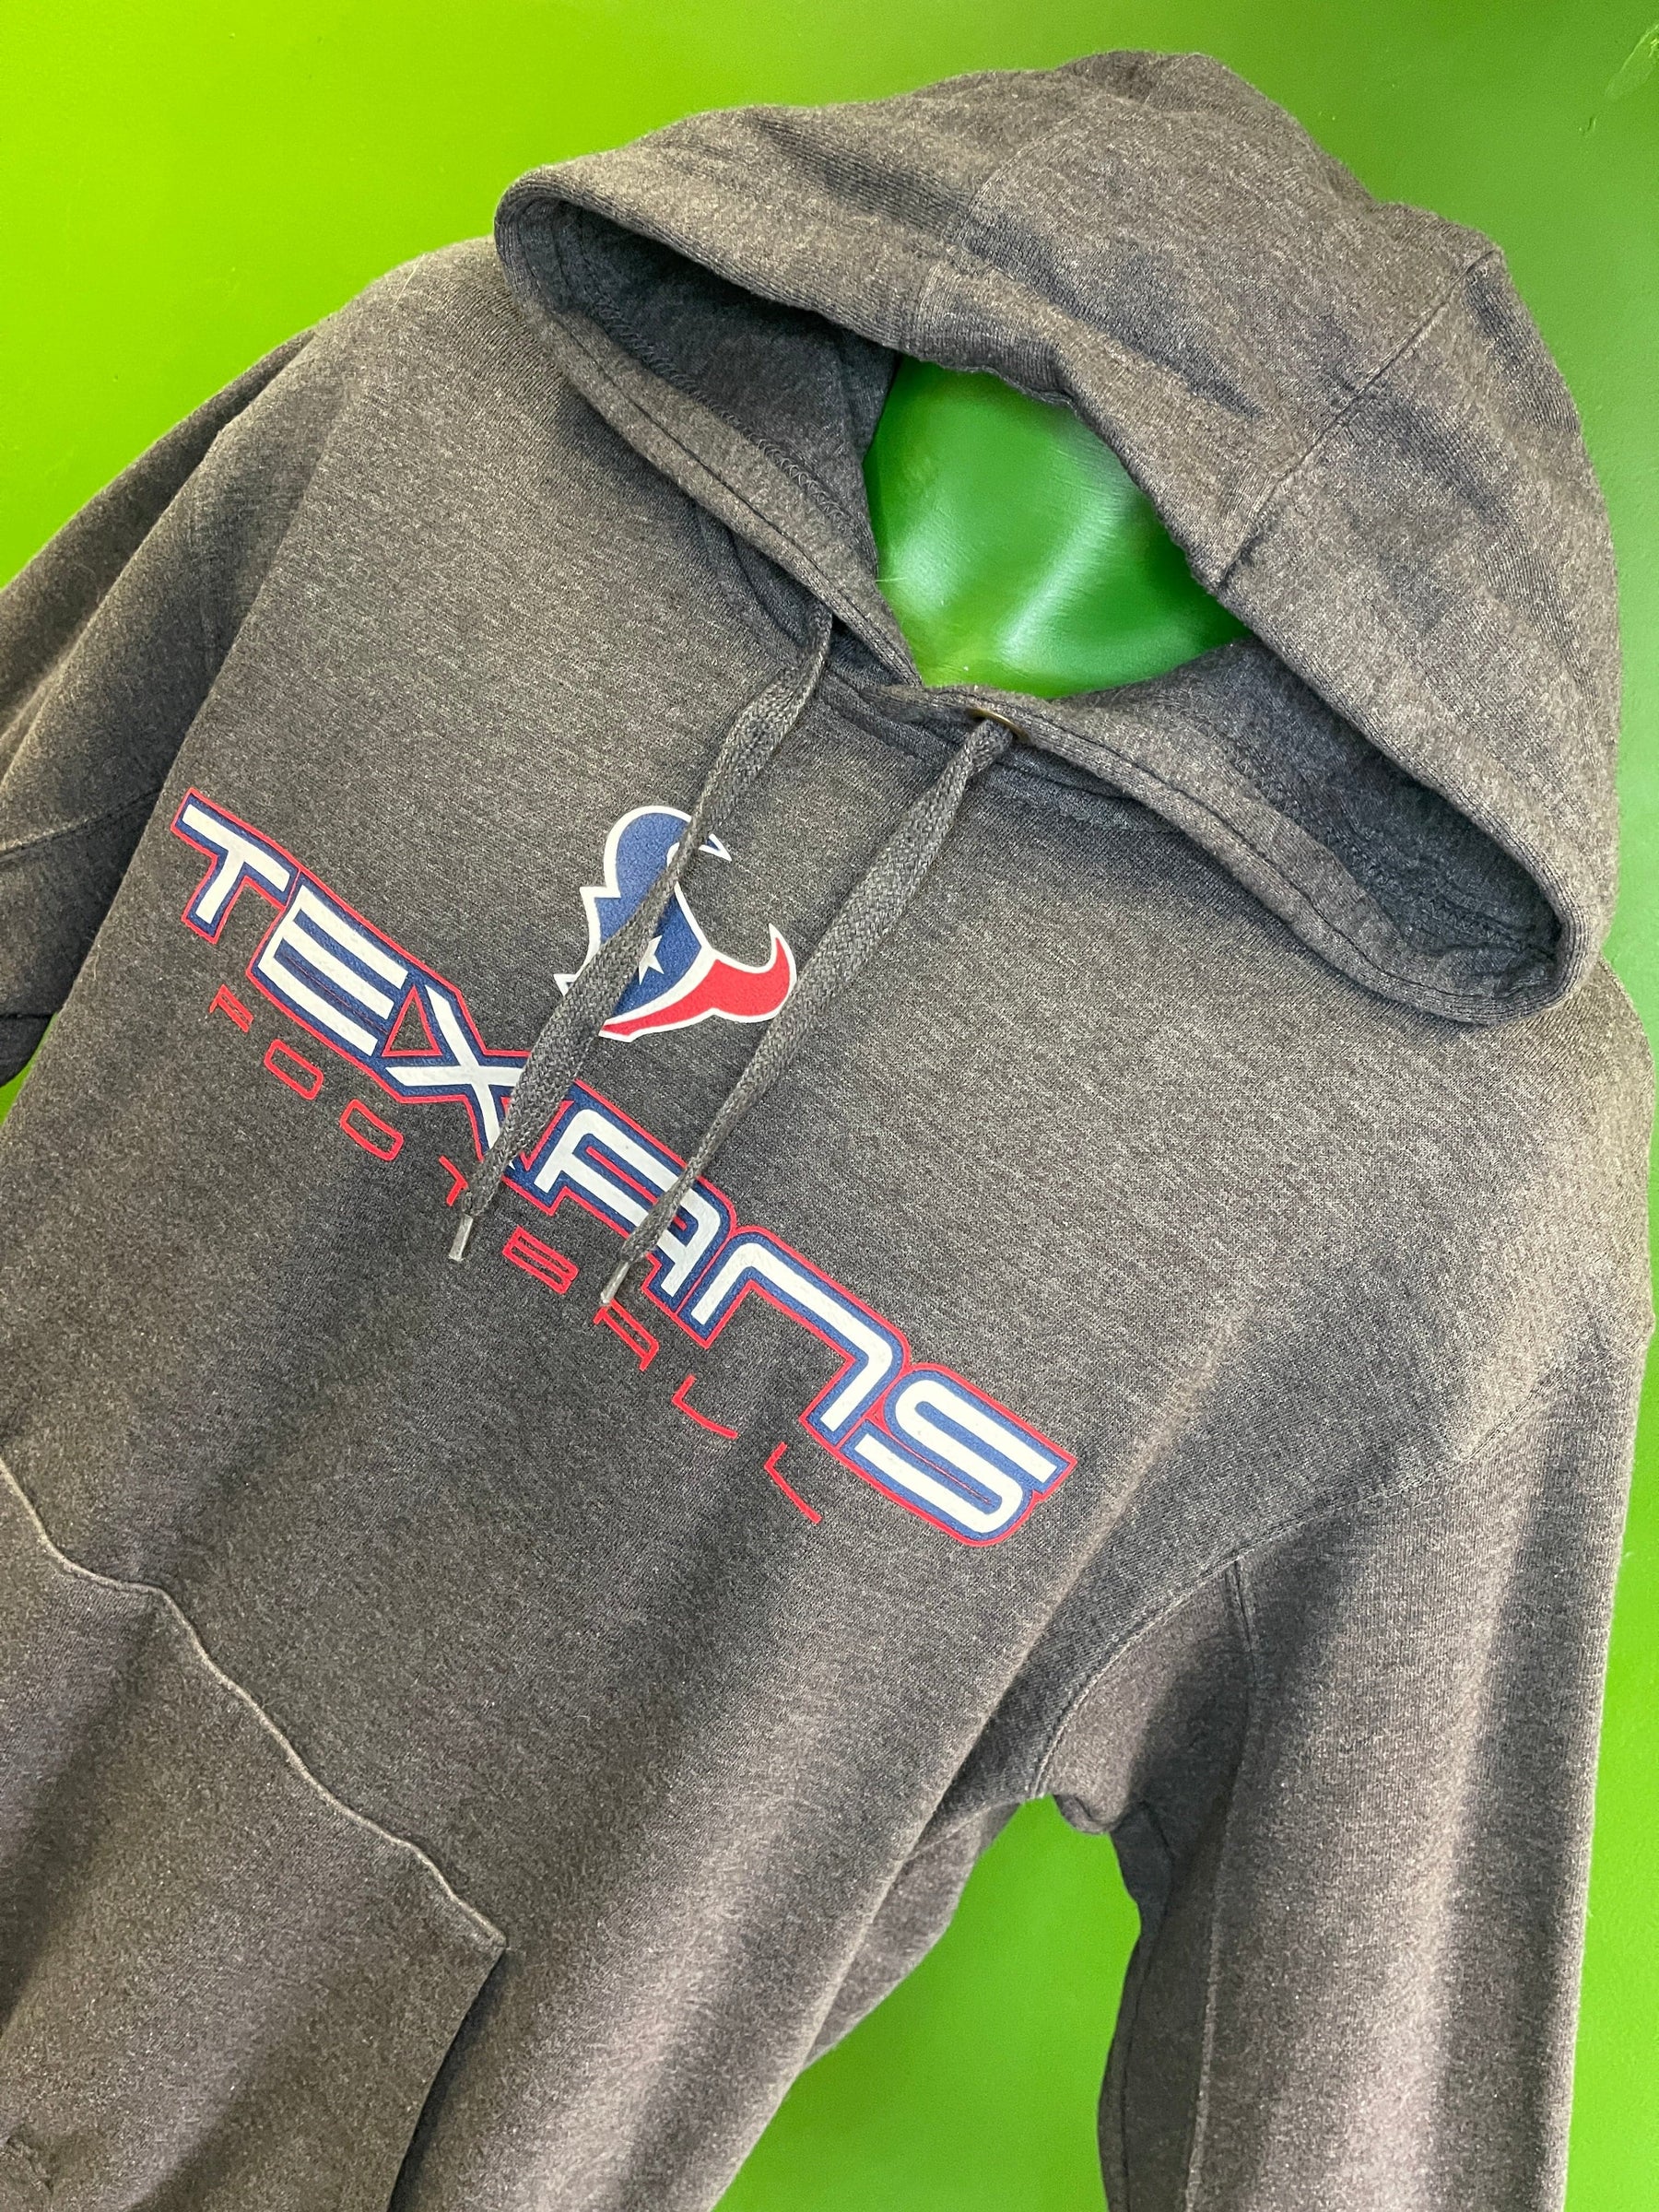 NFL Houston Texans Heathered Grey Pullover Hoodie Men's X-Large